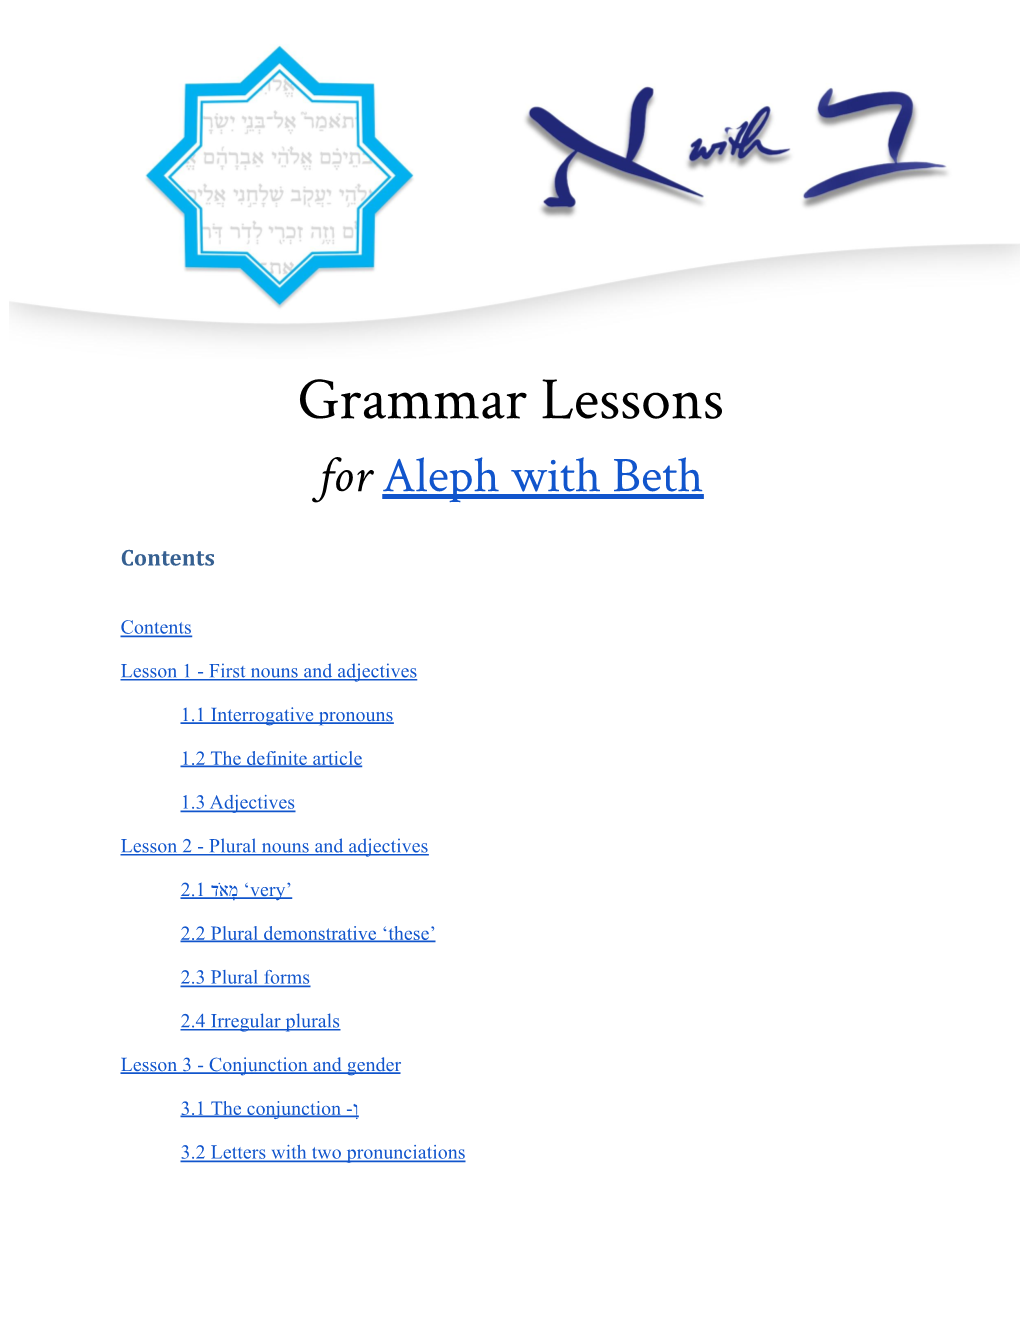 Grammar Lessons for Aleph with Beth